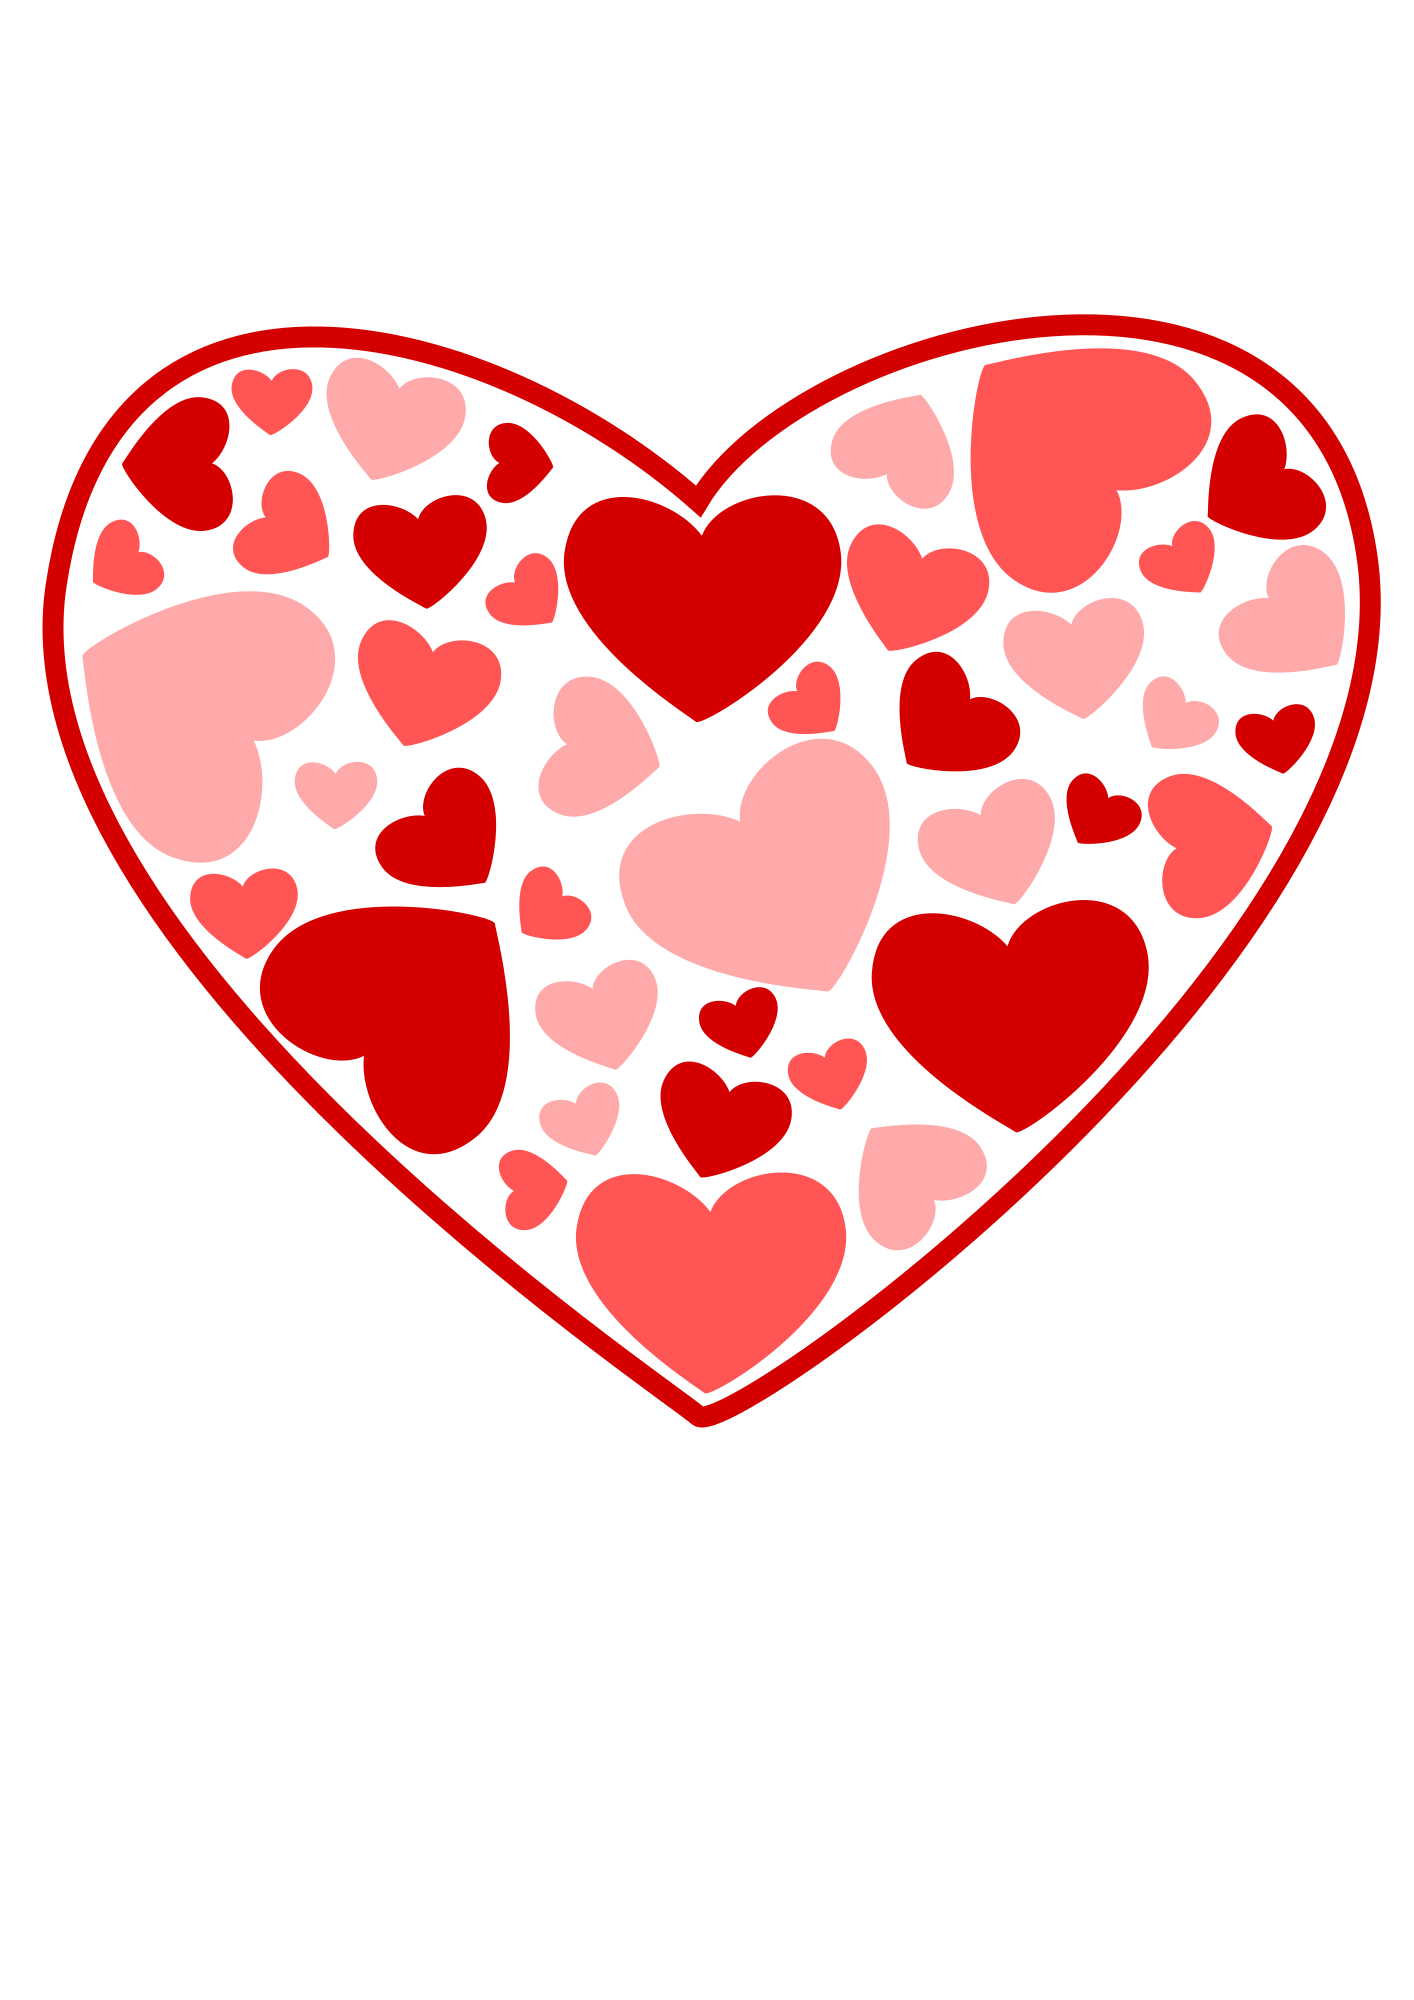 Heart of Hearts - Openclipart